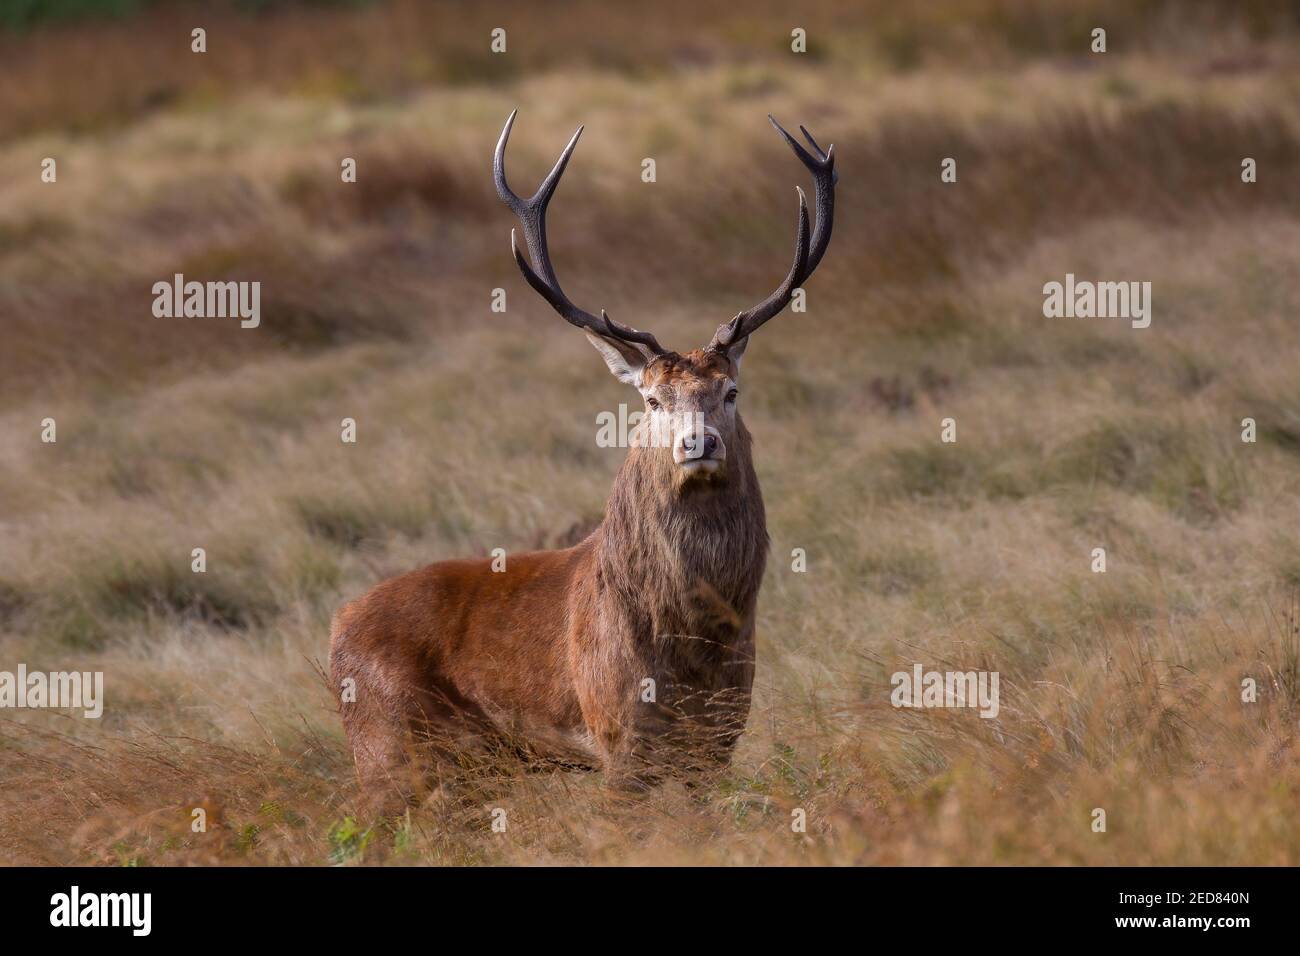 Wild red stag deer standing alone in the British countryside. Taken in the Peak District National Park in England, UK. Stock Photo